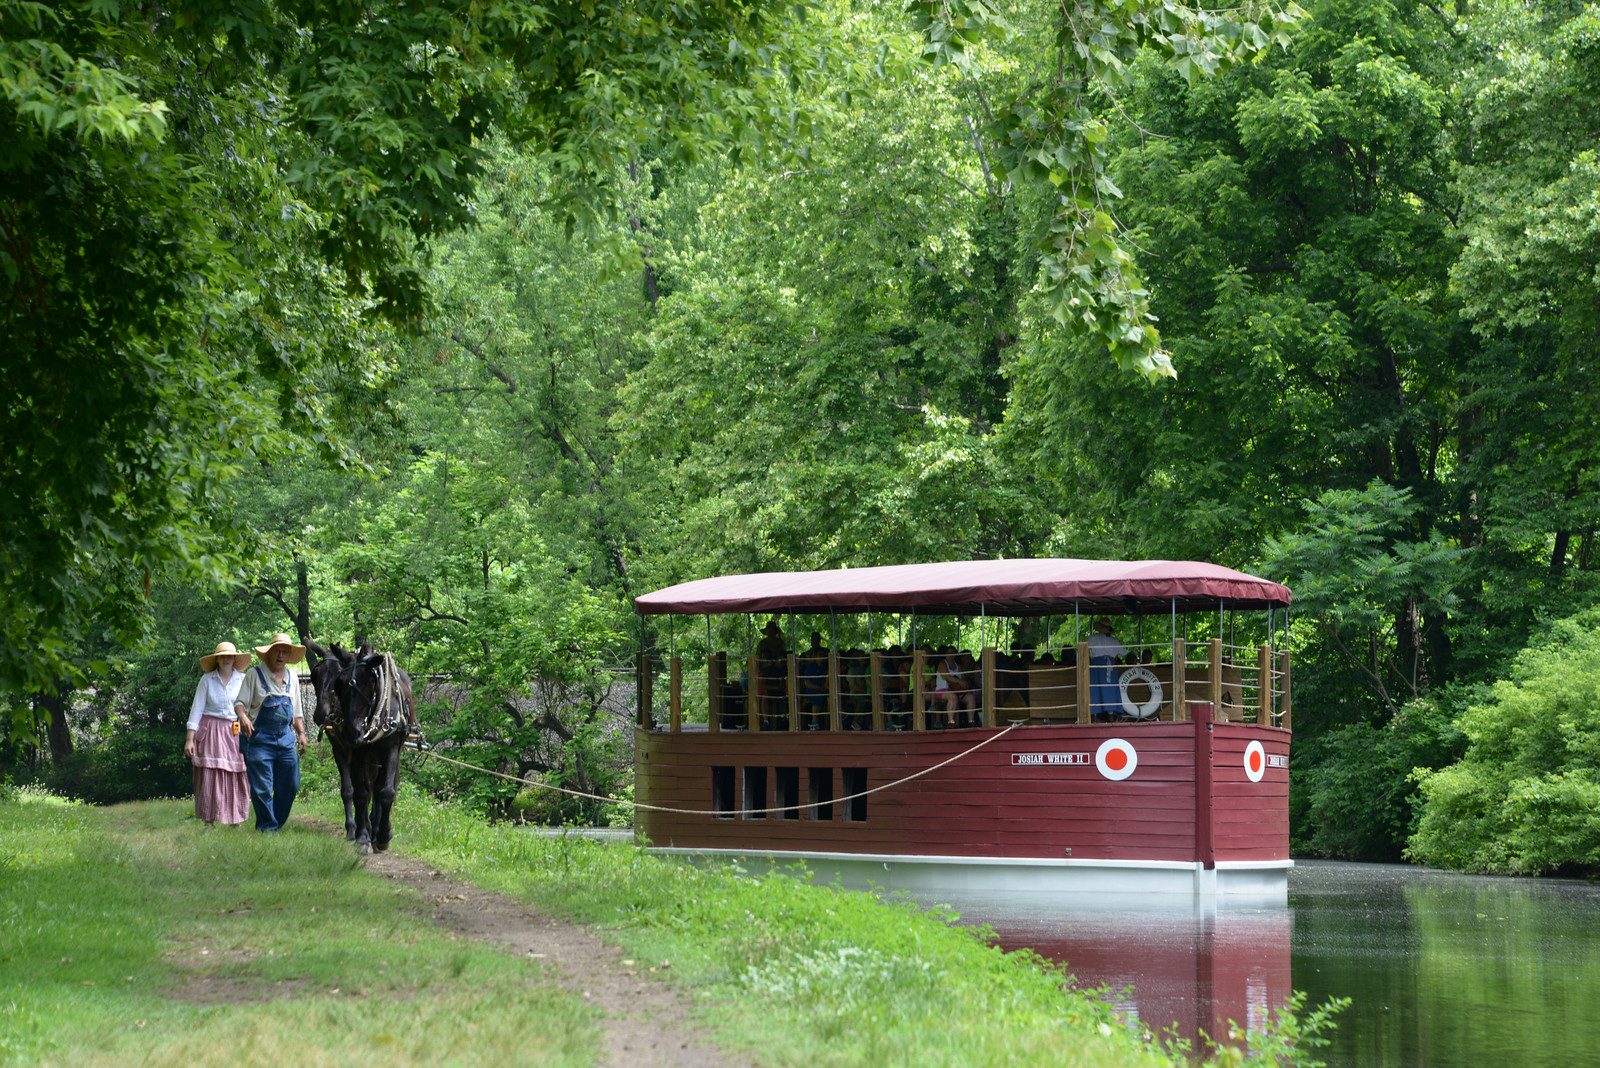 Opening Day for Canal Boat Rides